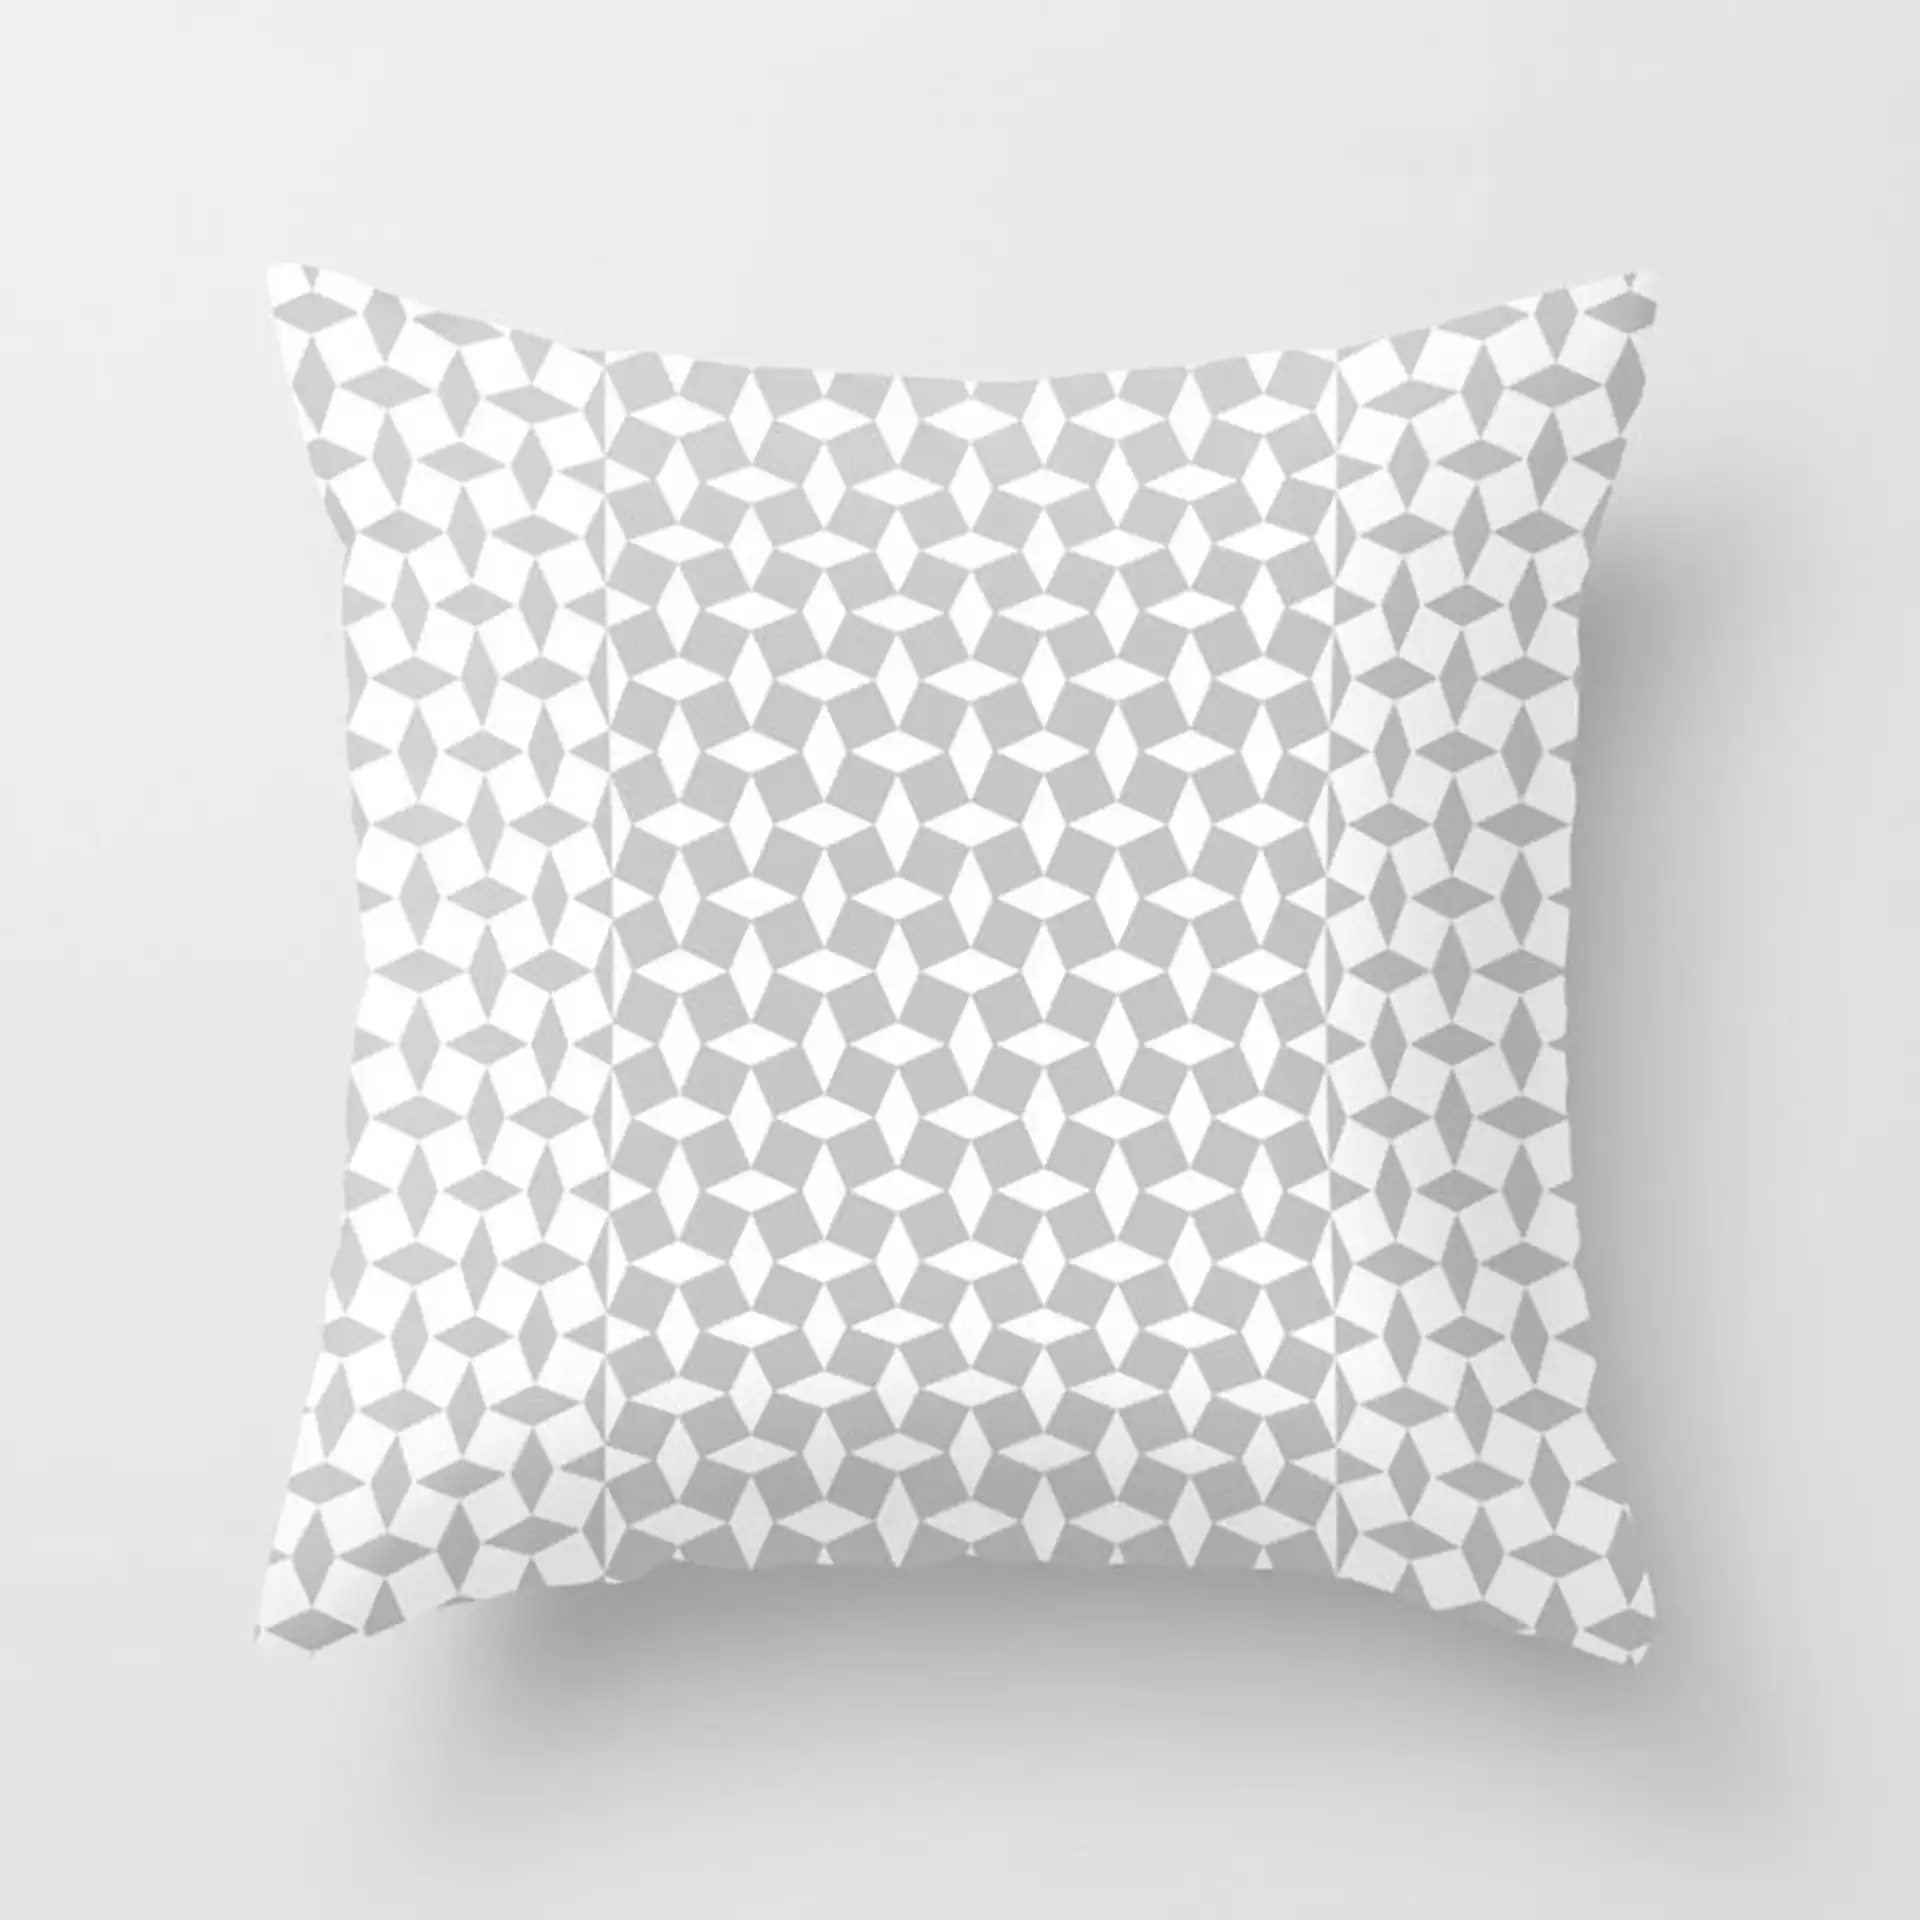 Patchwork Tile In Grey And White Couch Throw Pillow by Becky Bailey - Cover (16" x 16") with pillow insert - Outdoor Pillow